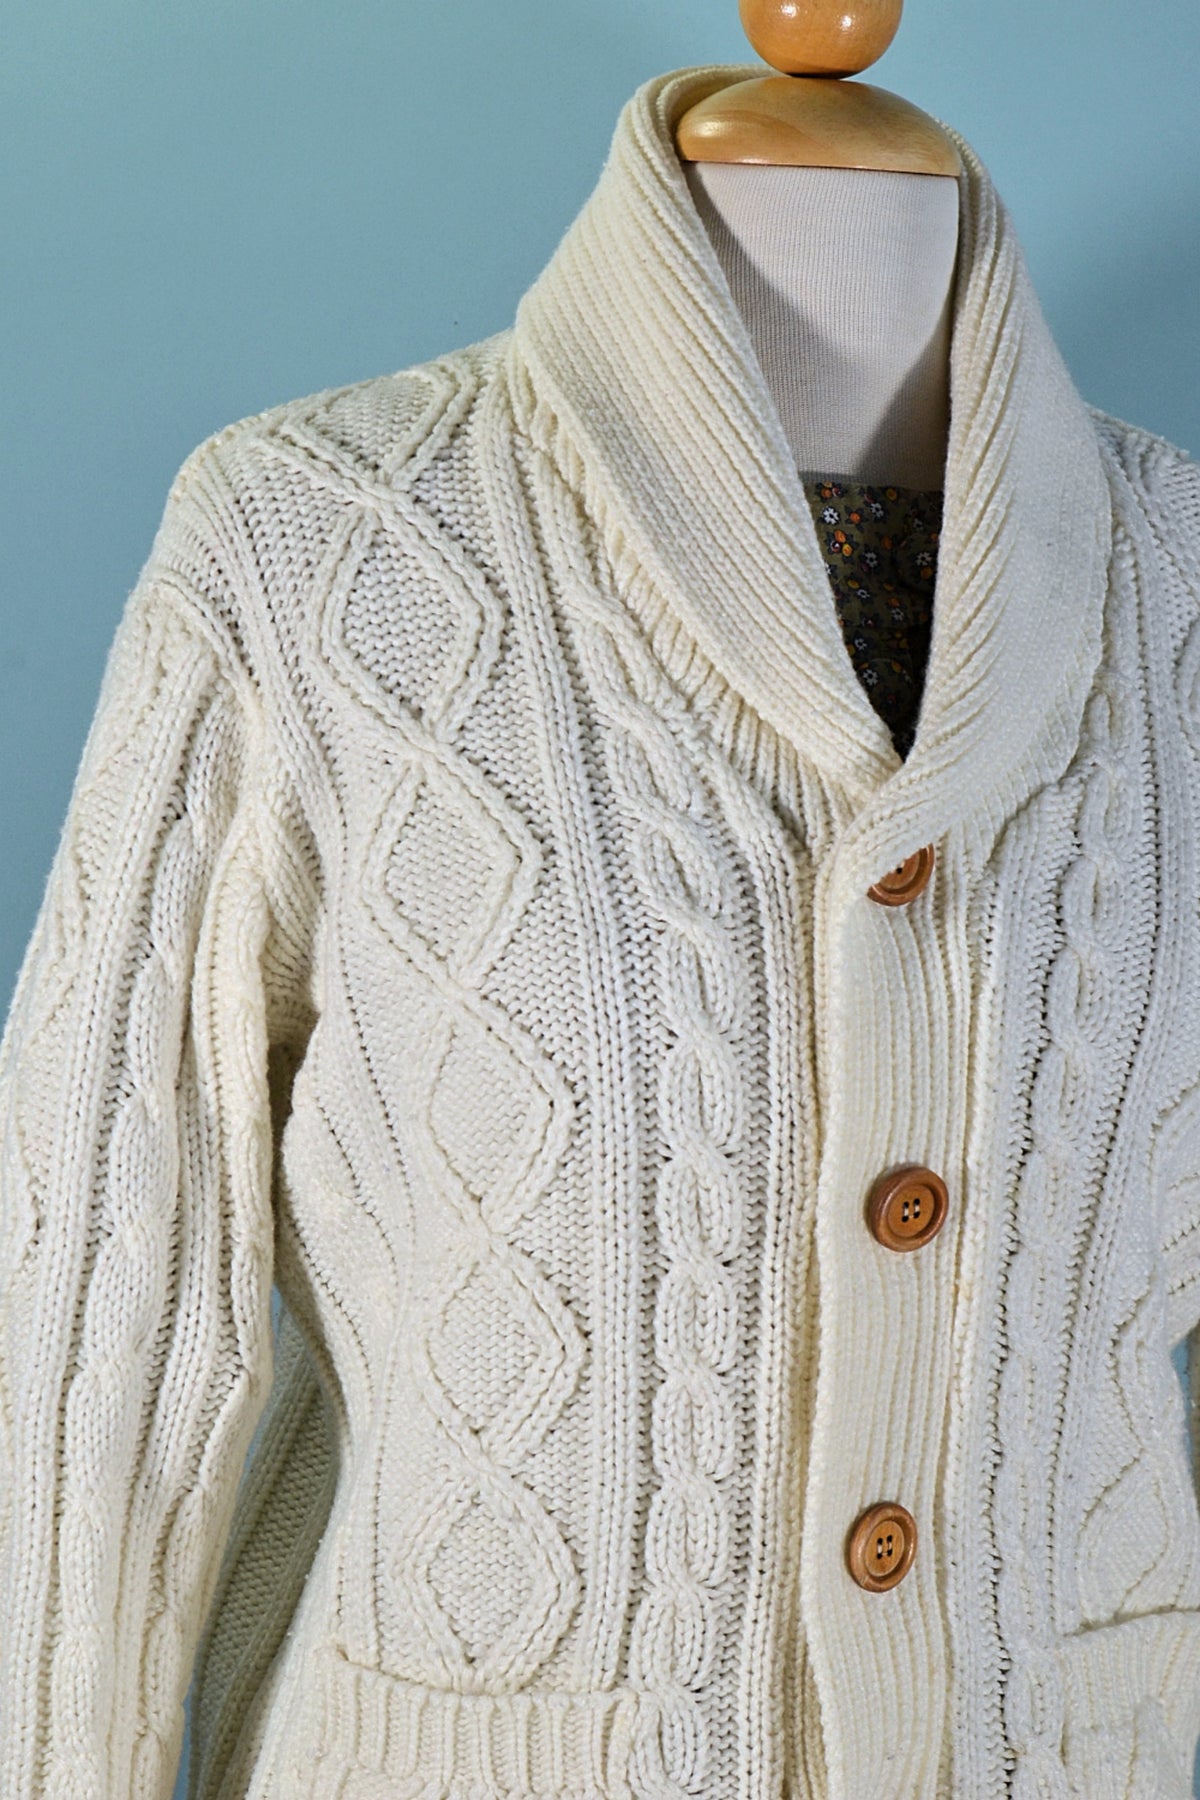 Vintage 60s/70s Cream Acrylic Cardigan Sweater, Pockets Cable Knit S/M ...